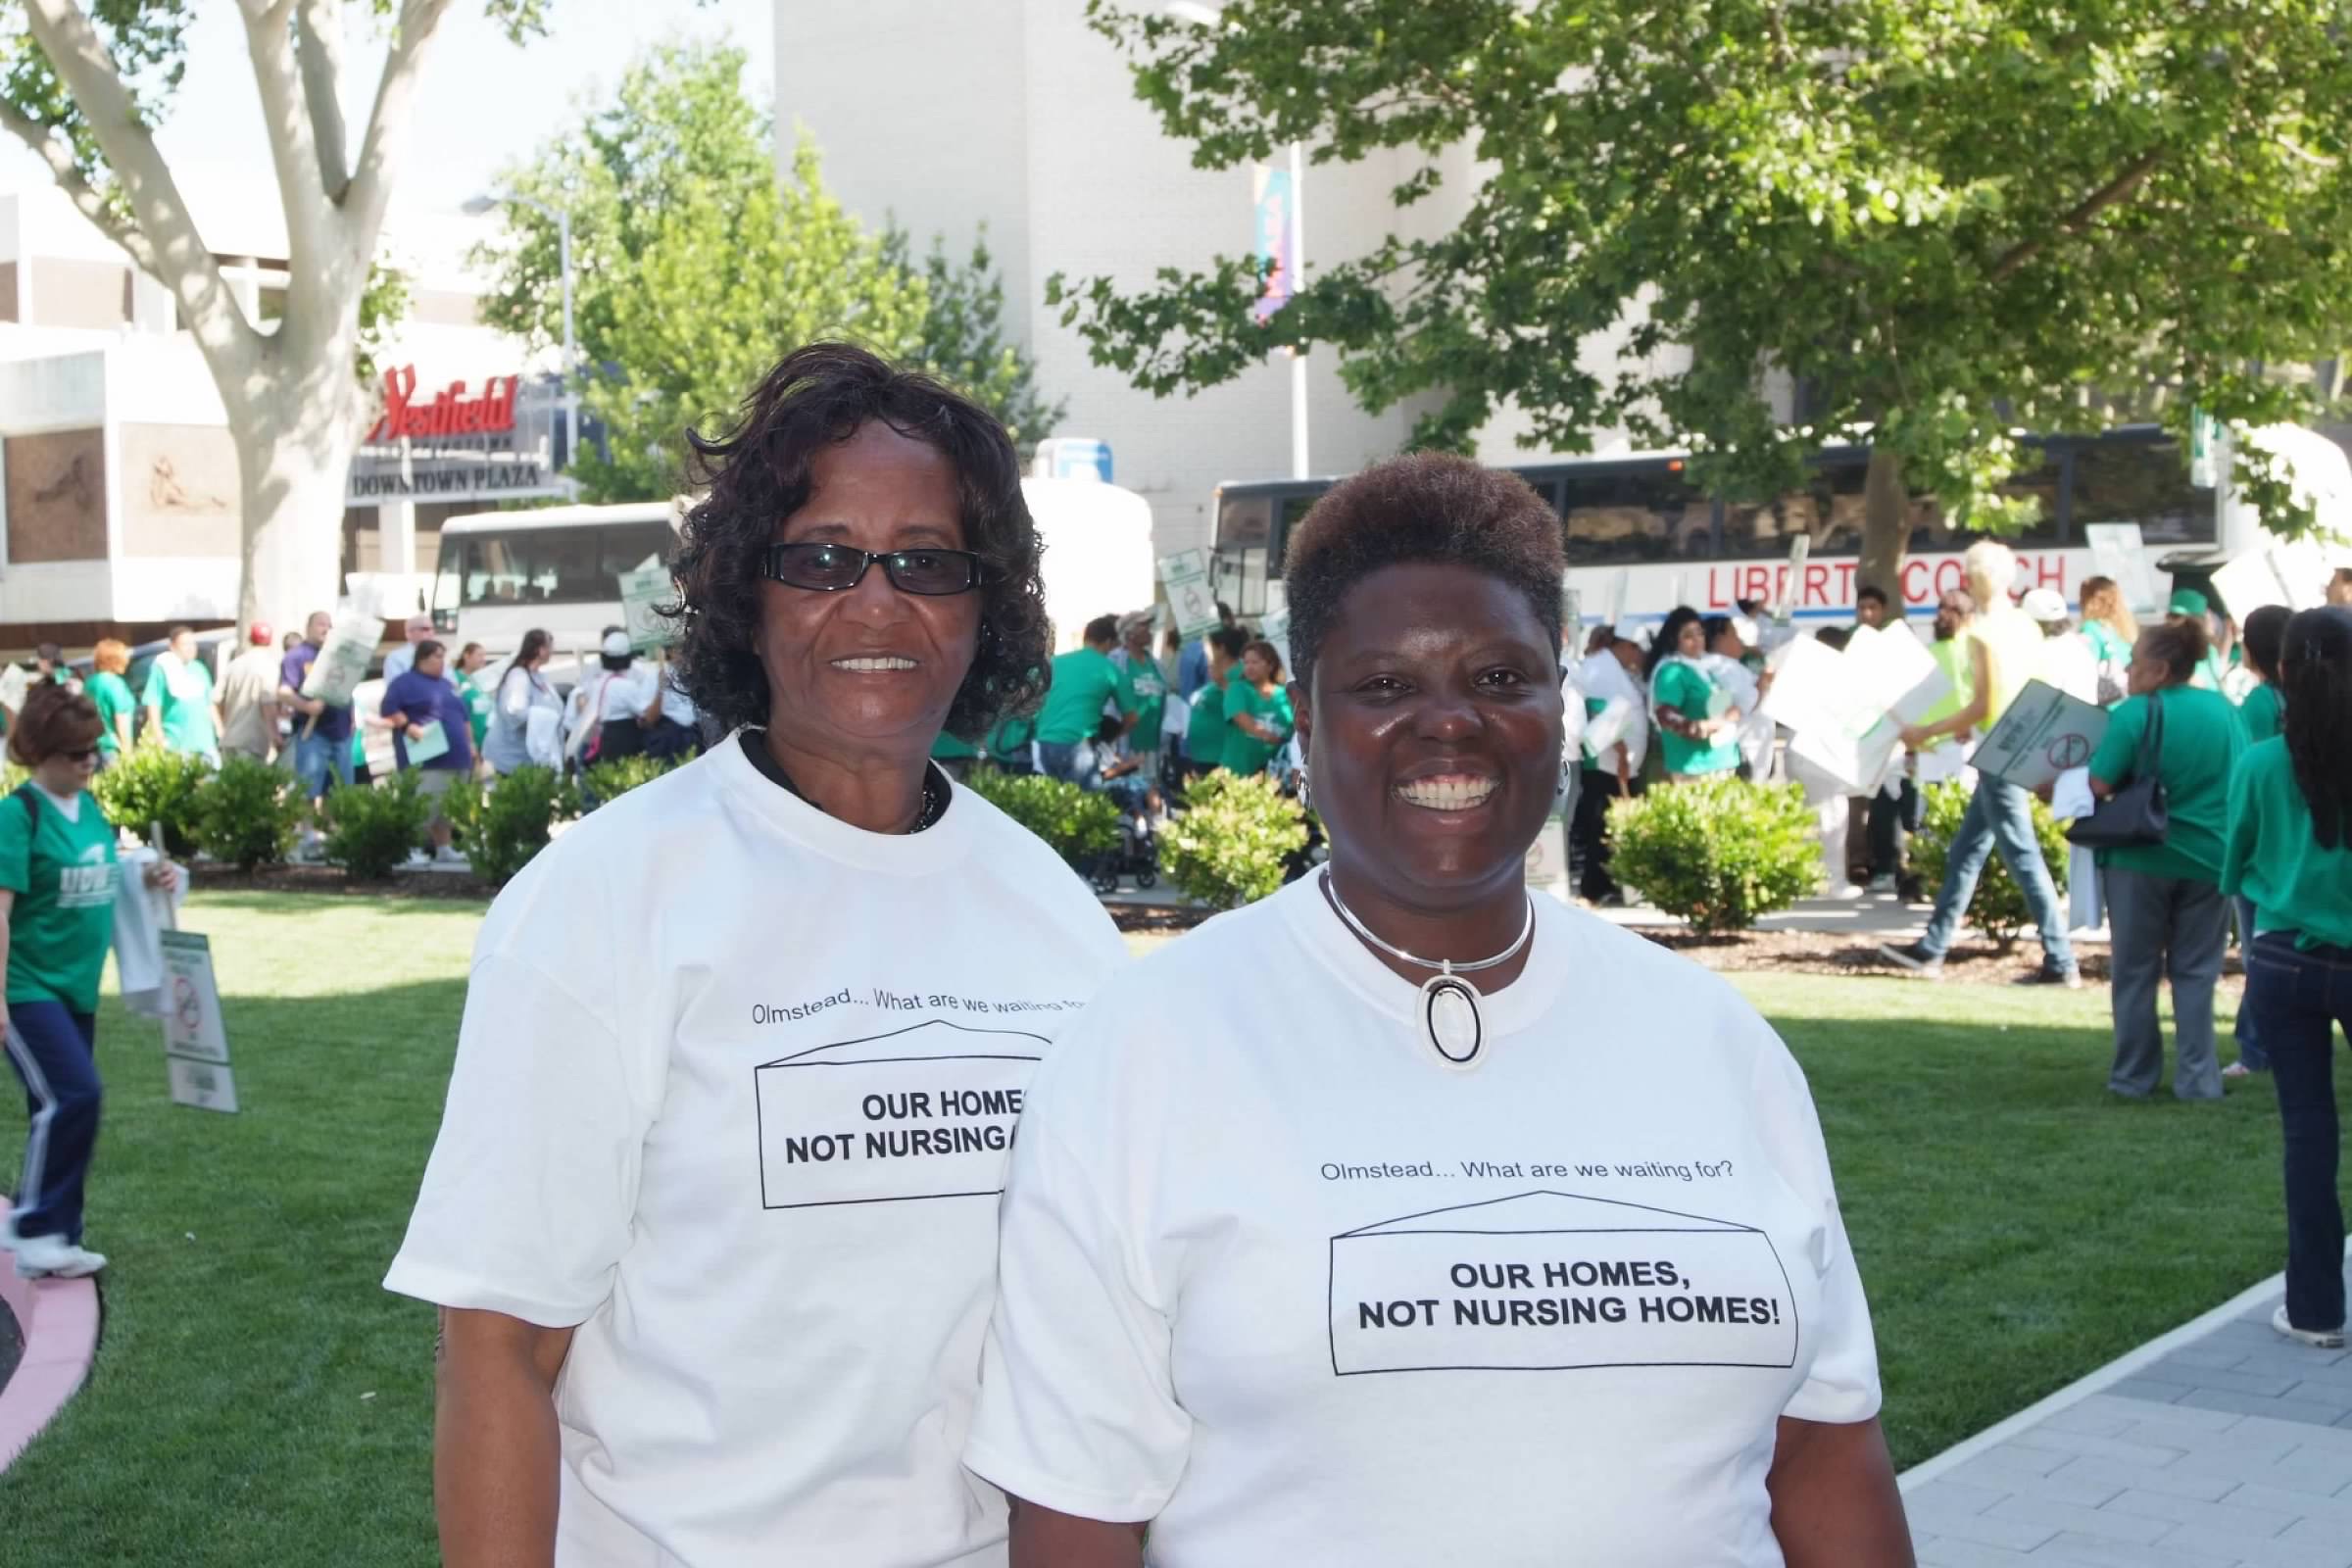 Photo of two Black women smiling for the camera in front of a grass field with people organizing. The women are wearing "our homes, not nursing homes" white t-shirts.